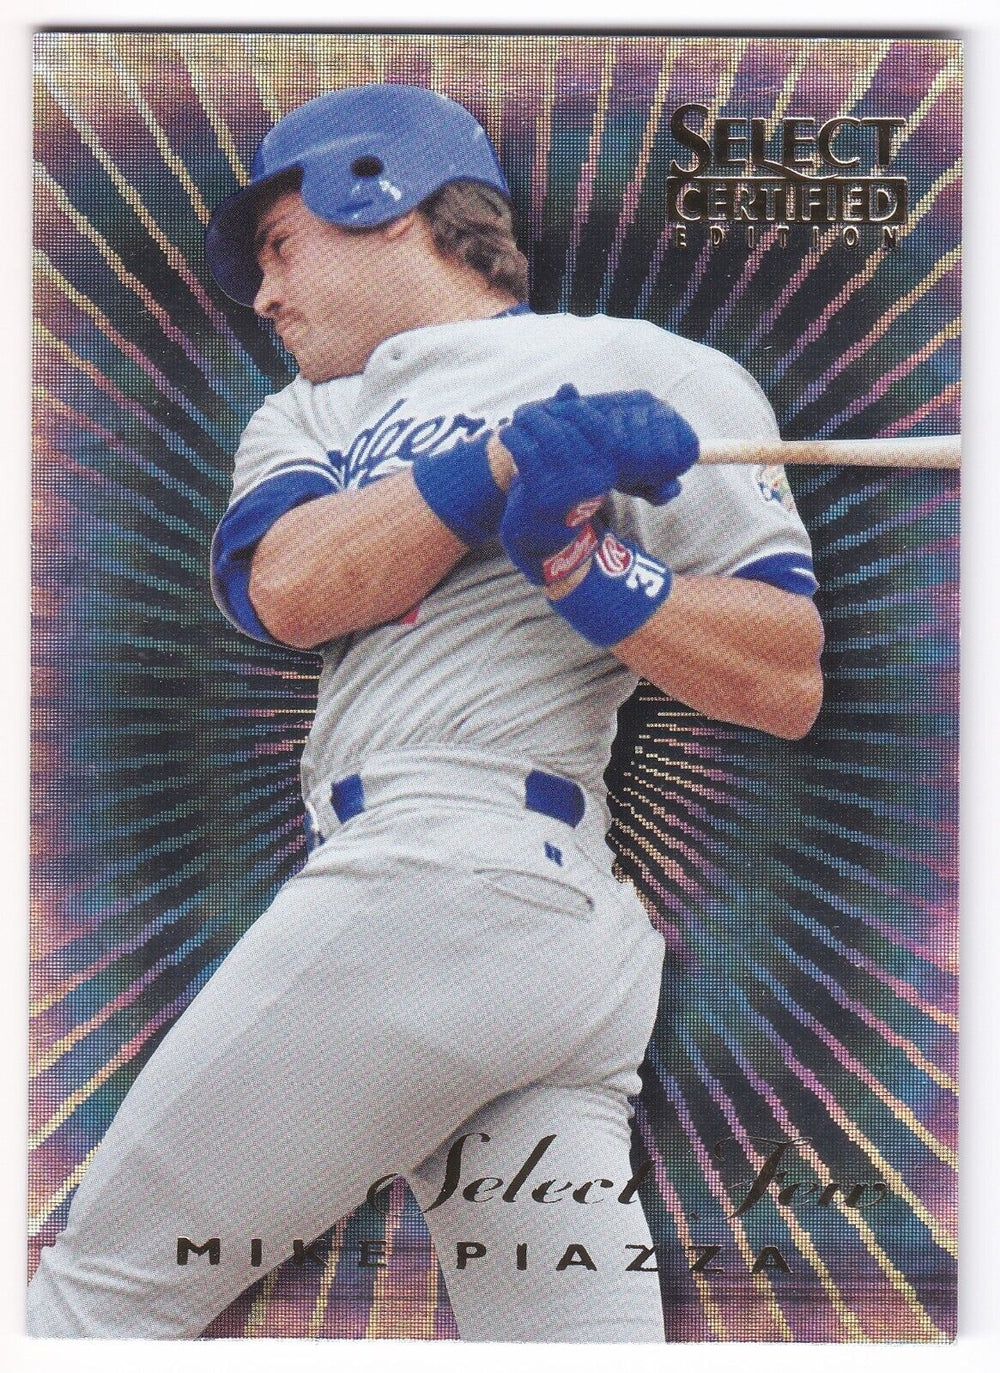 Mike Piazza 1996 Select Certified Edition Select Few Series Mint Card #10